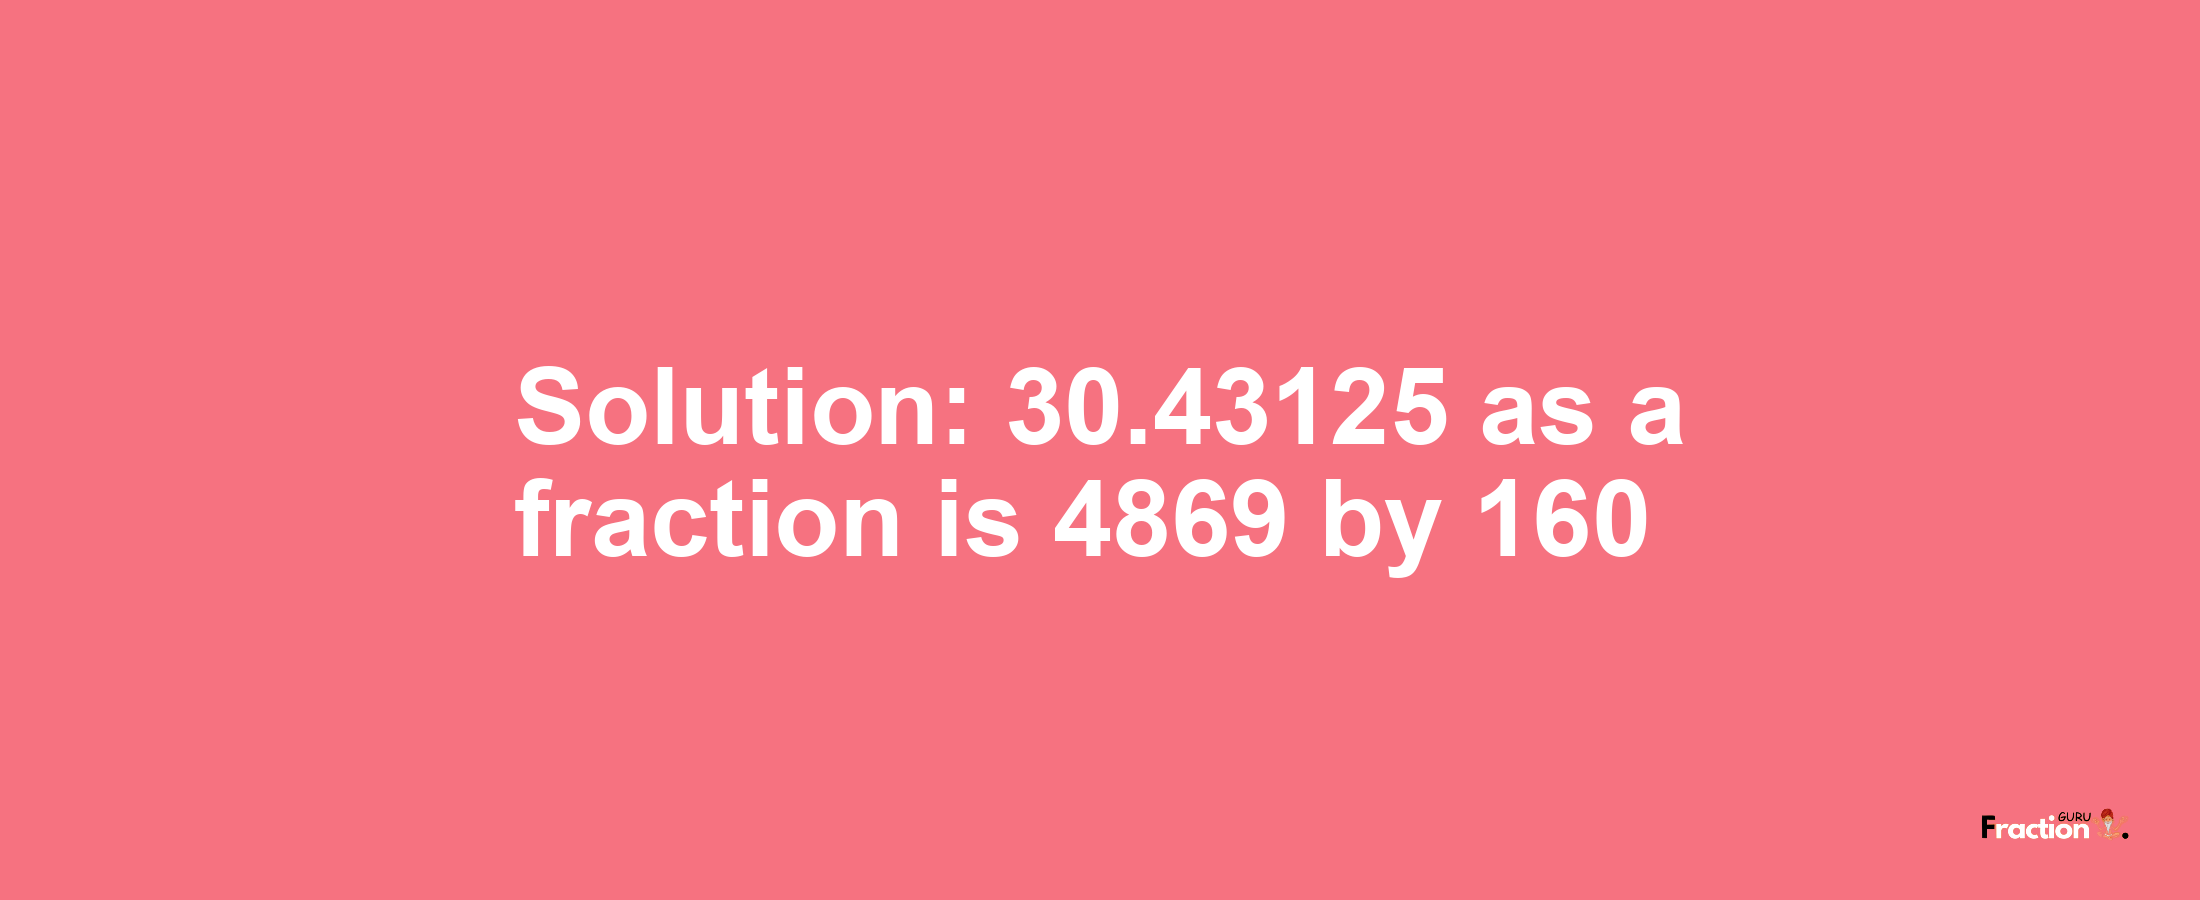 Solution:30.43125 as a fraction is 4869/160